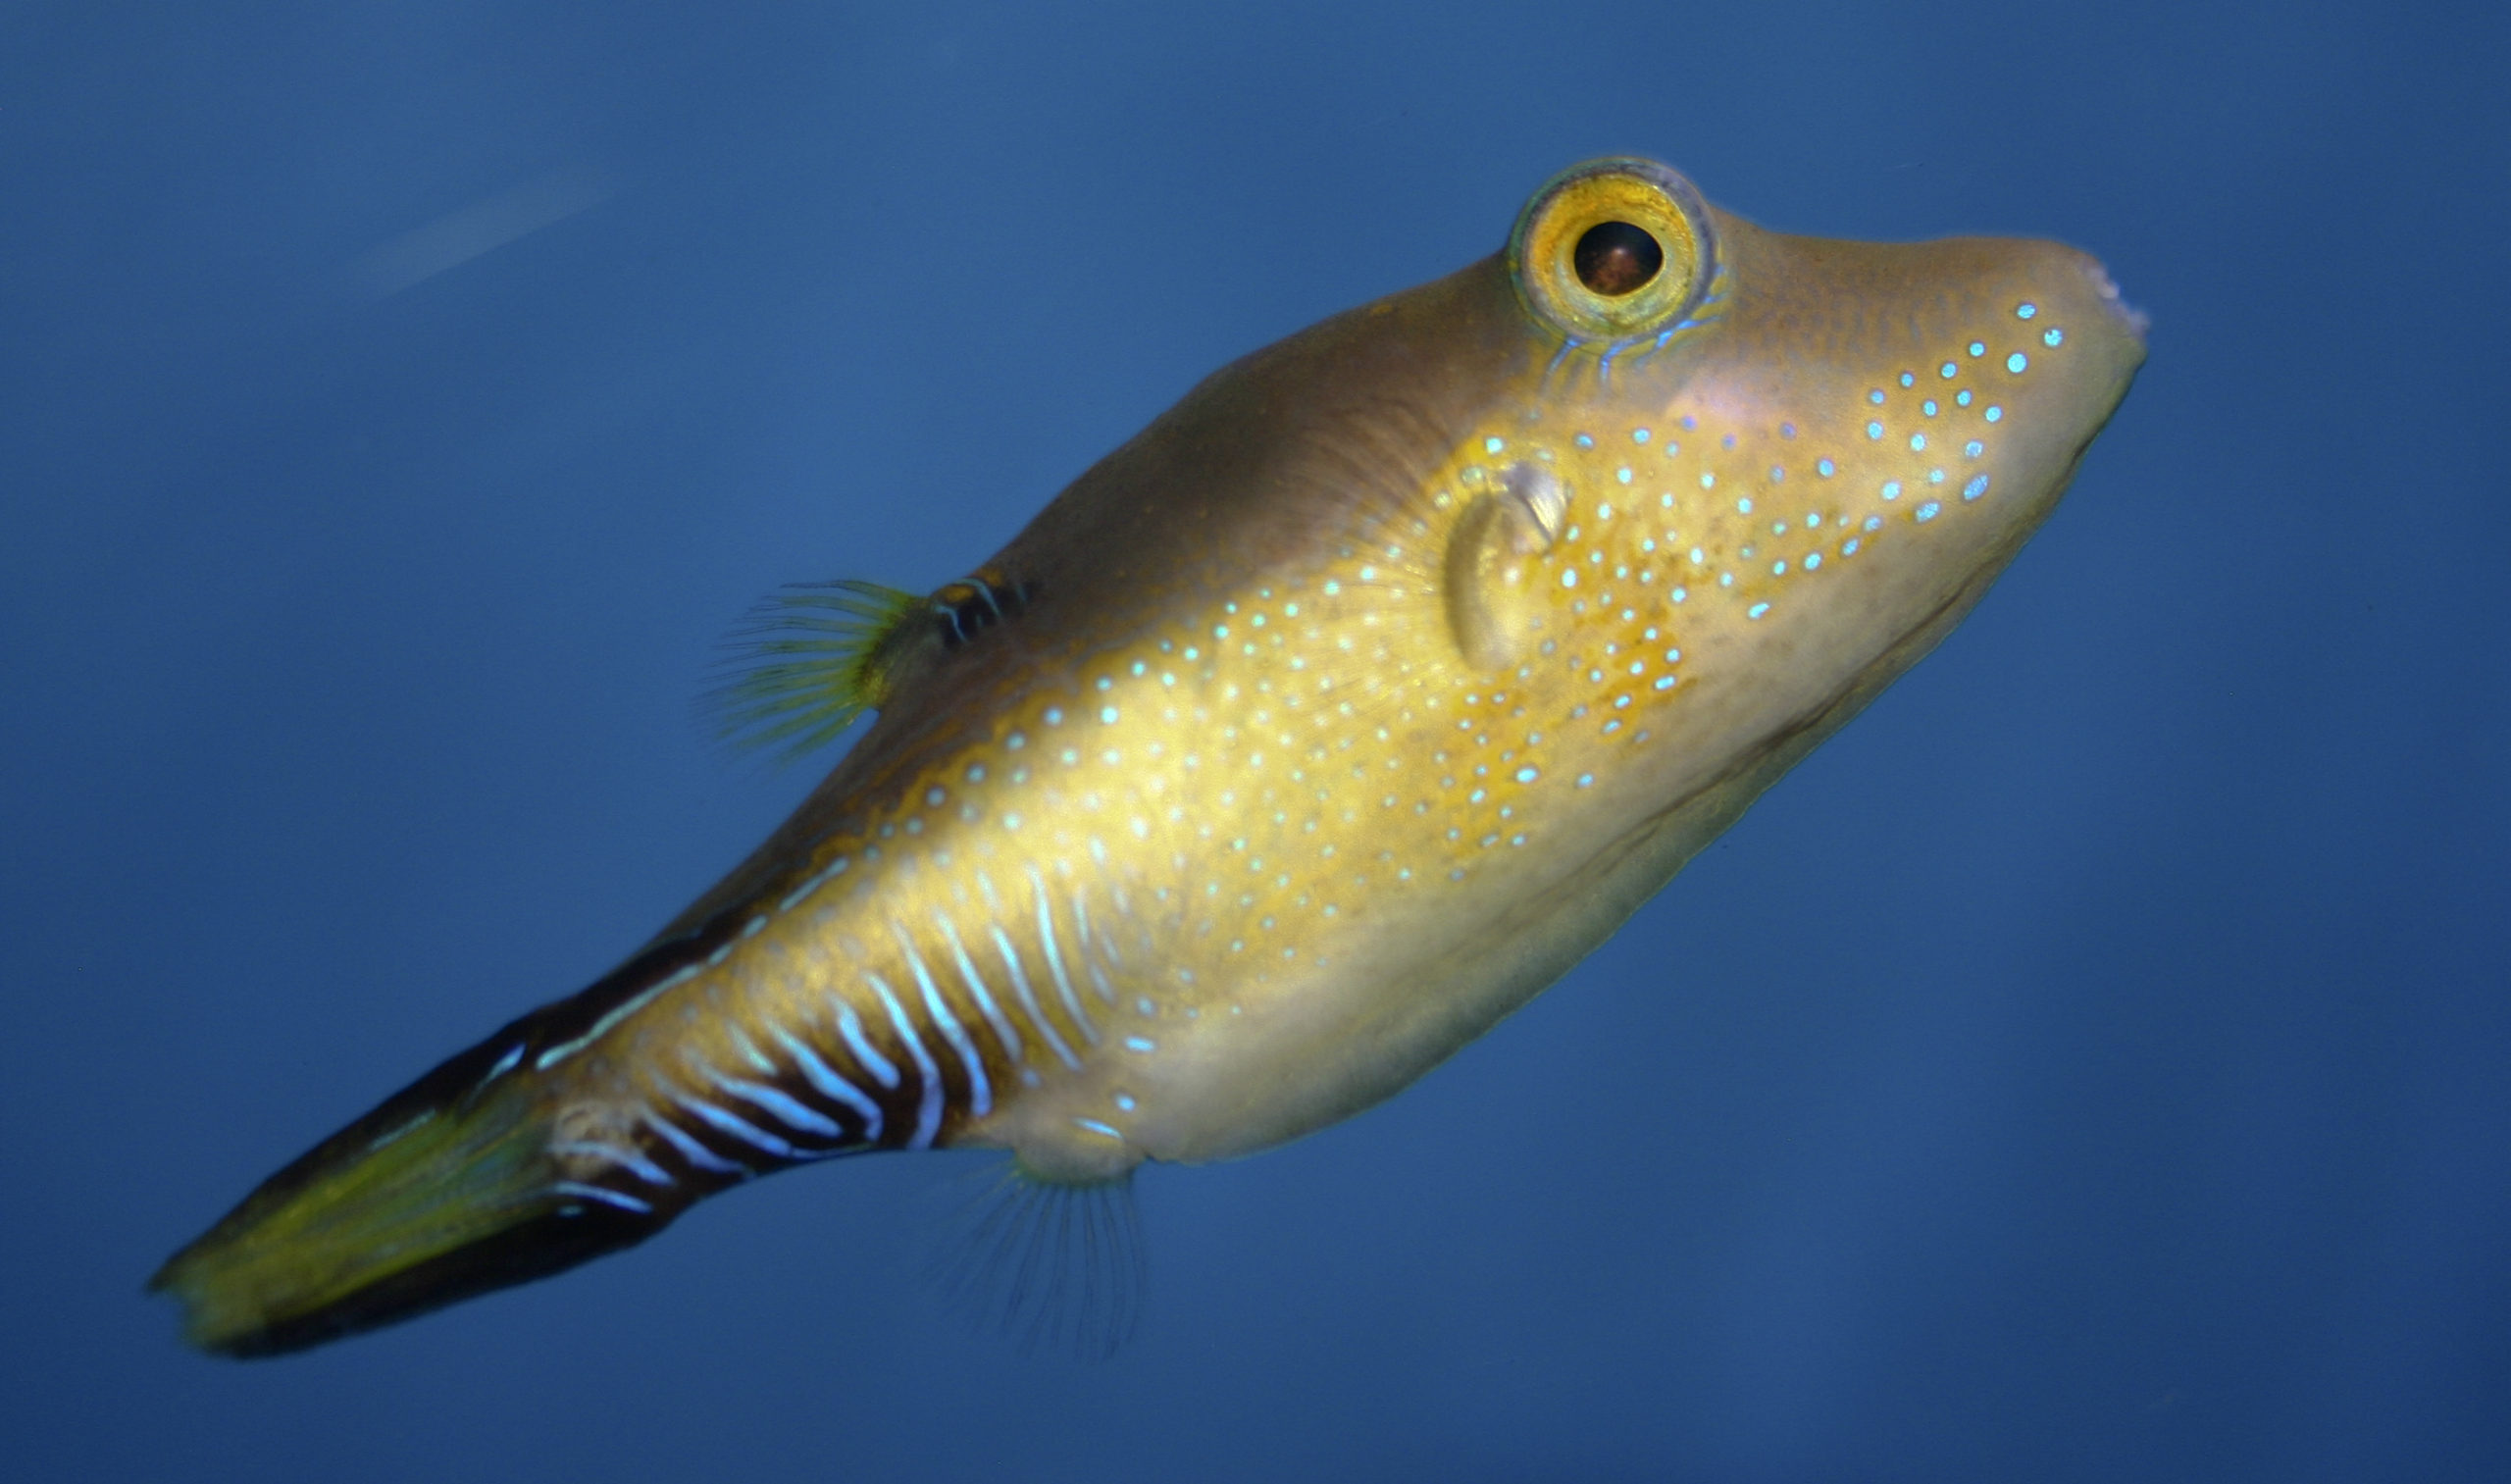 Caribbean sharp-nose puffer swimming in open water.